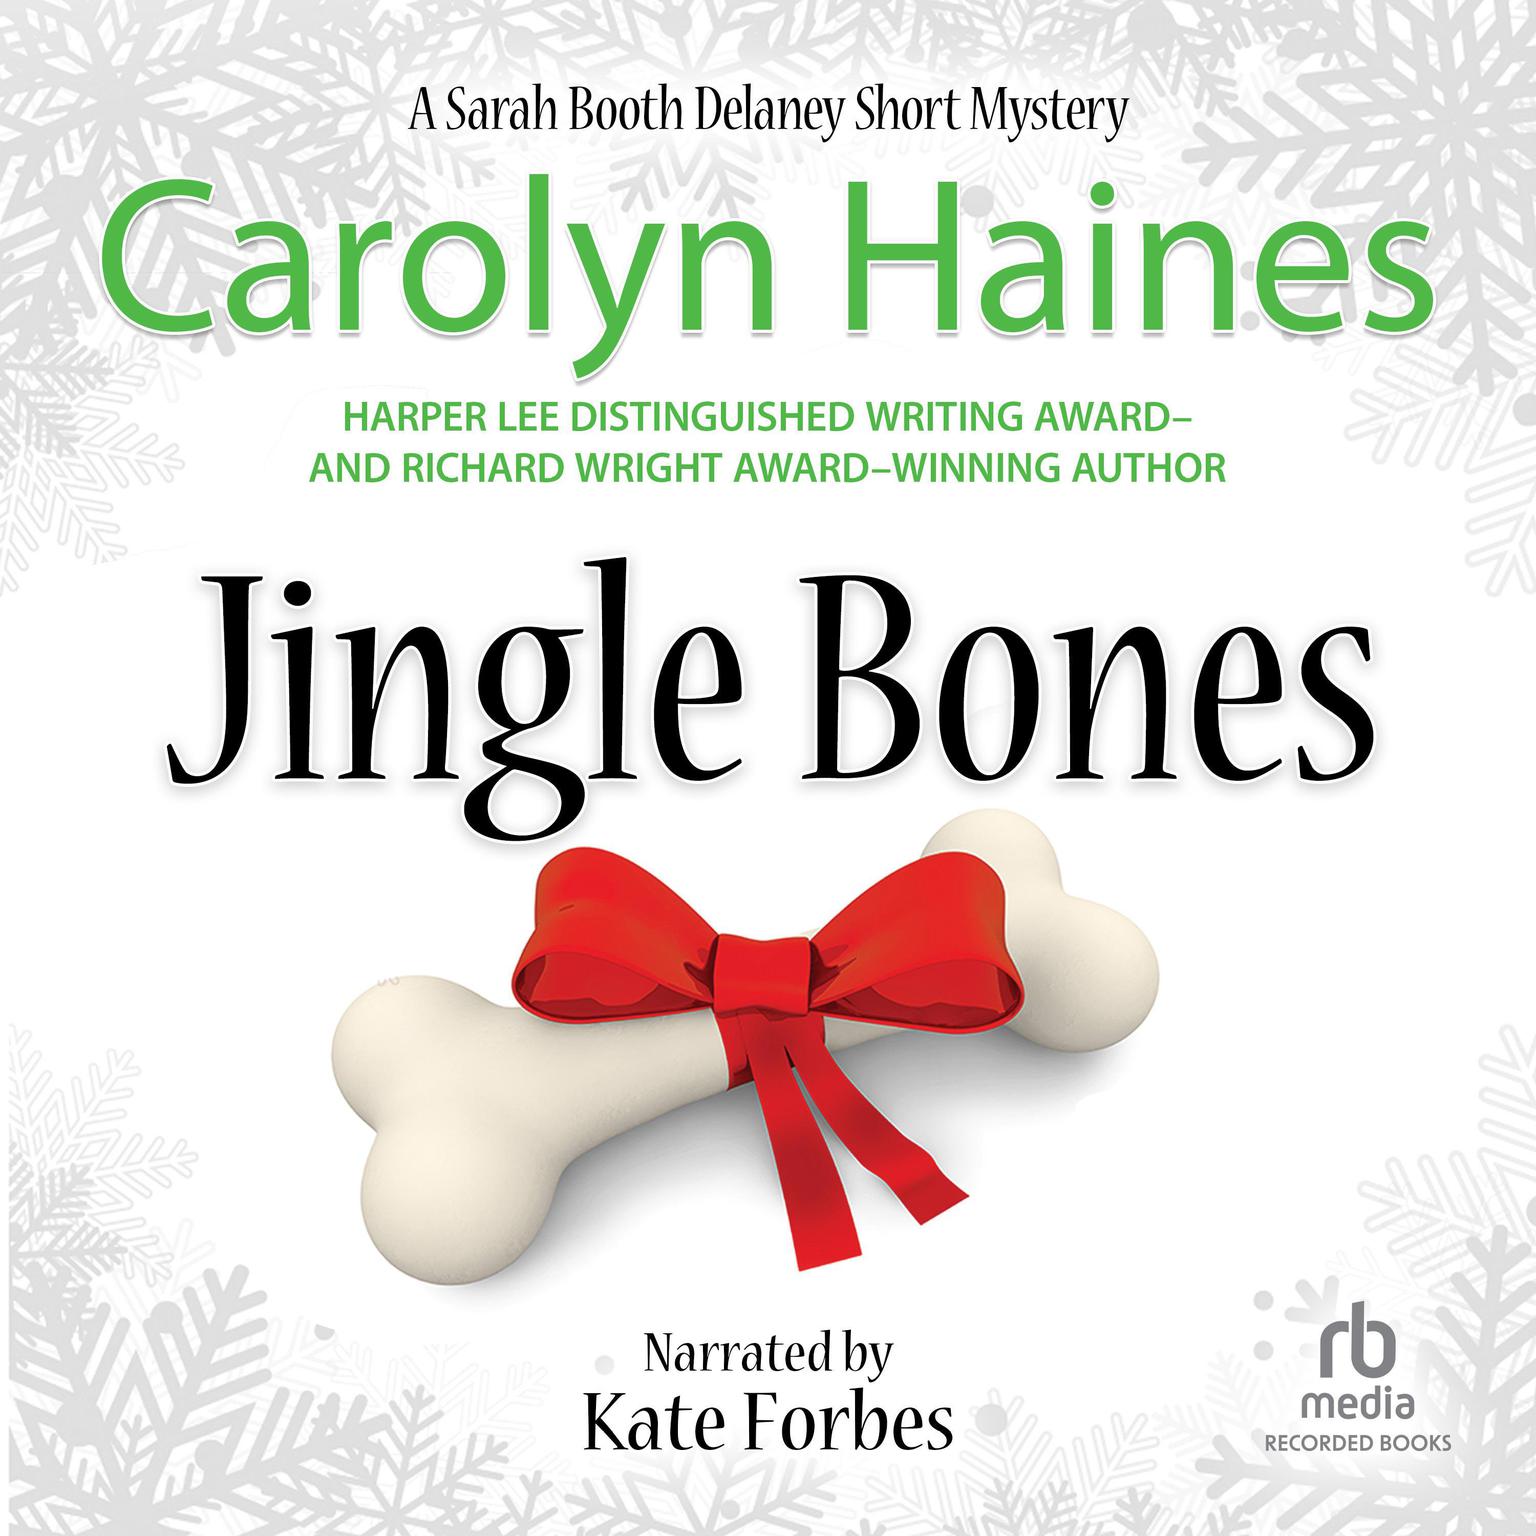 Jingle Bones: A Sarah Booth Delaney Short Mystery Audiobook, by Carolyn Haines